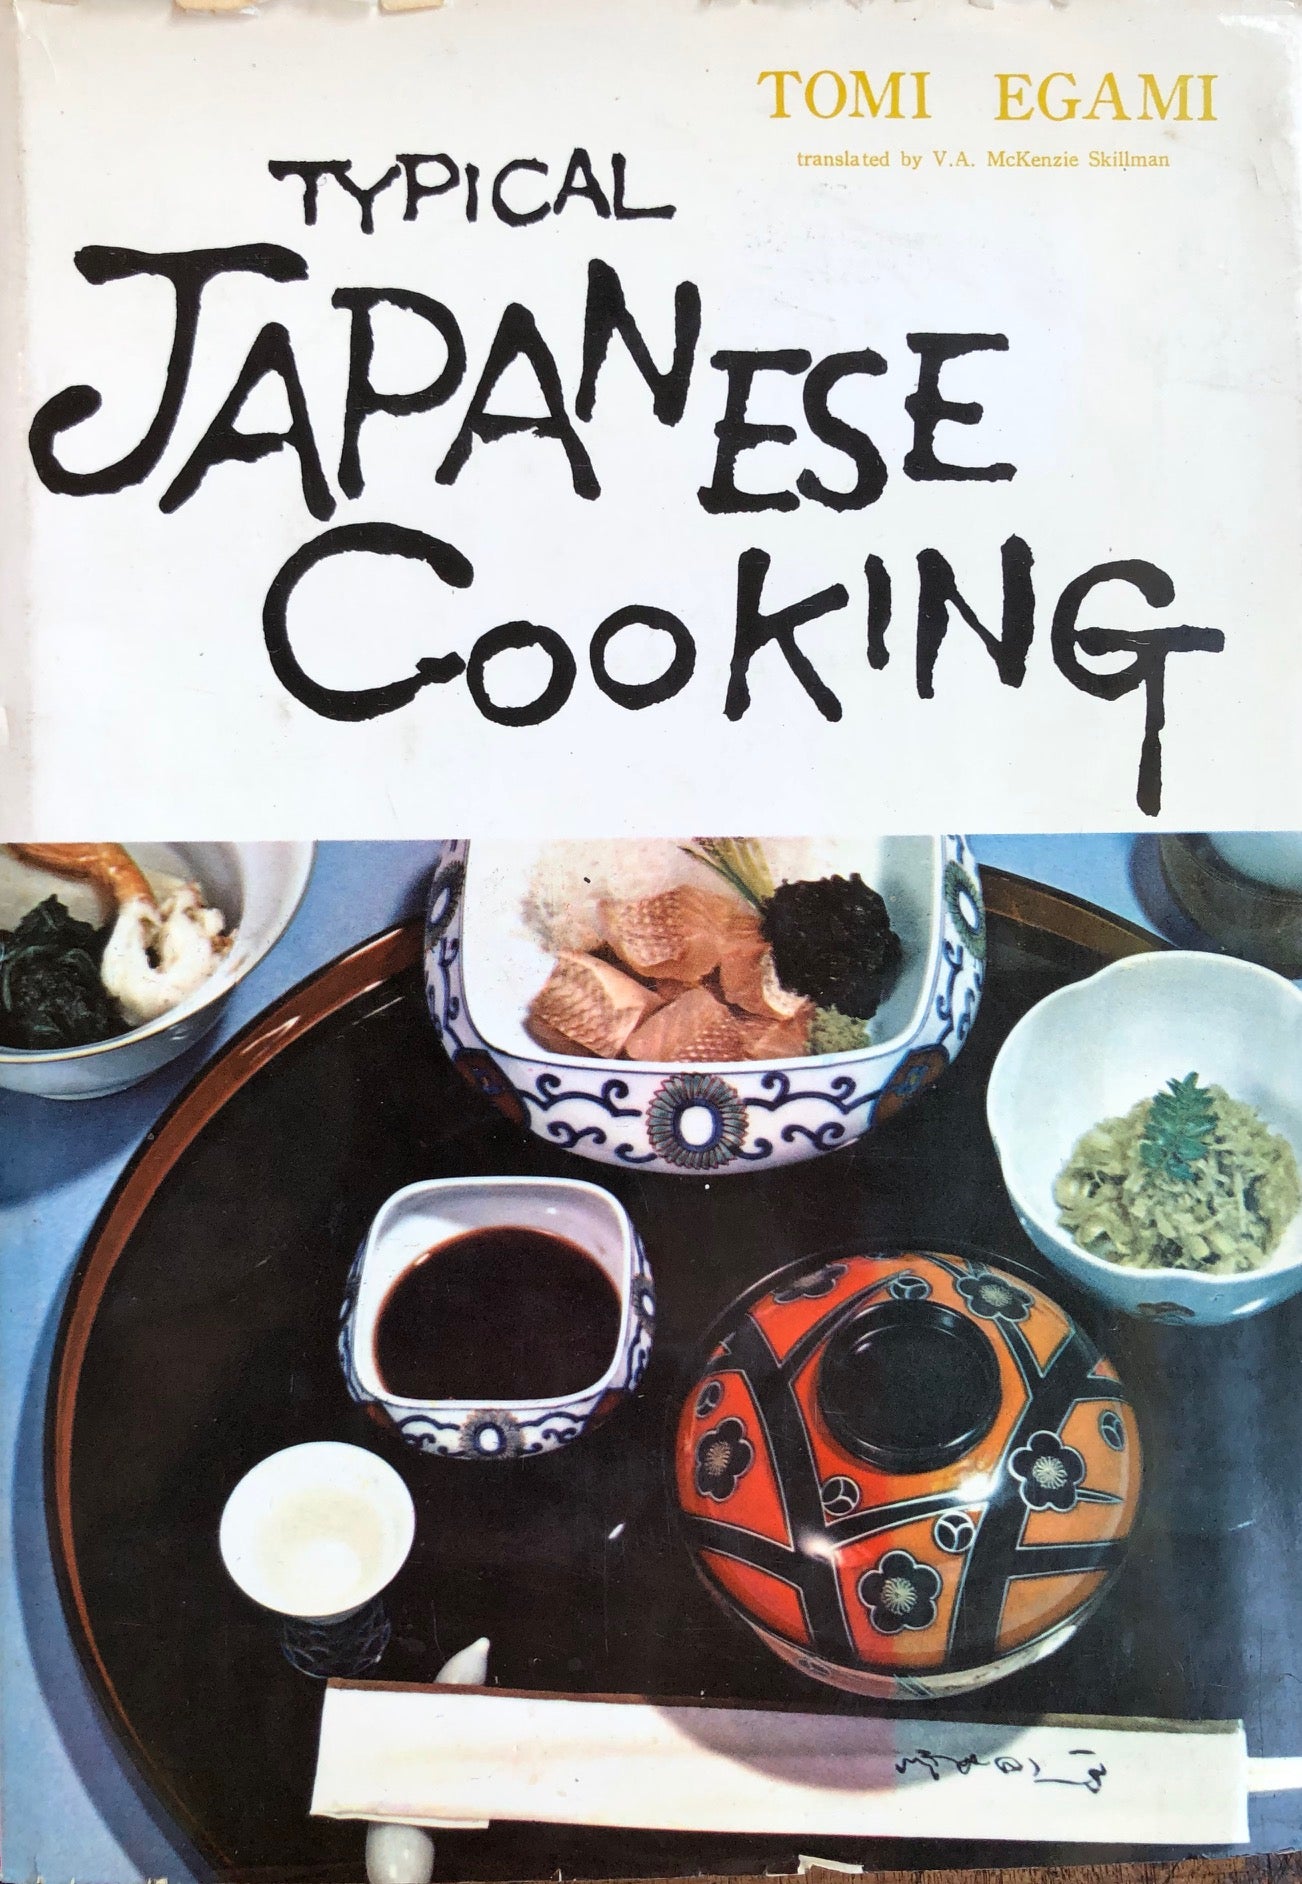 (*NEW ARRIVAL*) (Japanese) Karen Green. Japanese Cooking for the American Table.